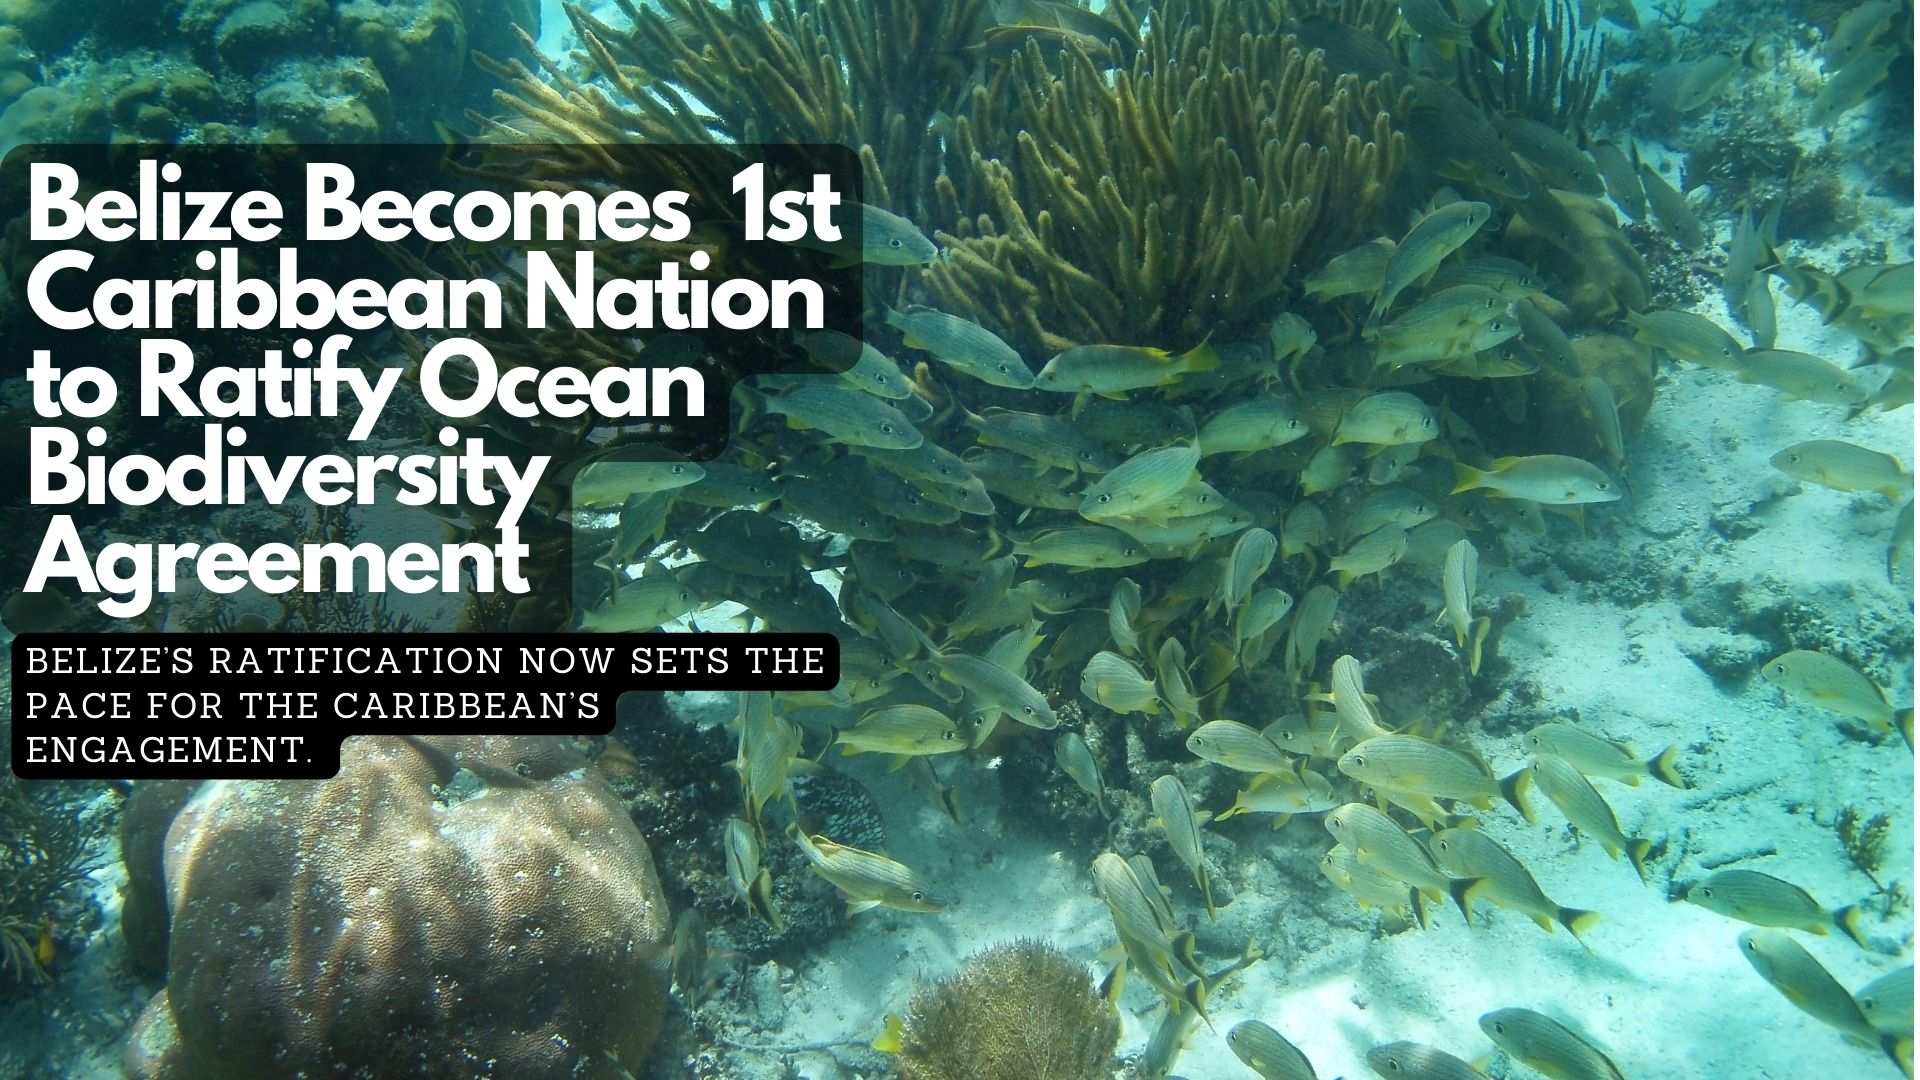 Belize Becomes First Caribbean Nation to Ratify Ocean Biodiversity Agreement 